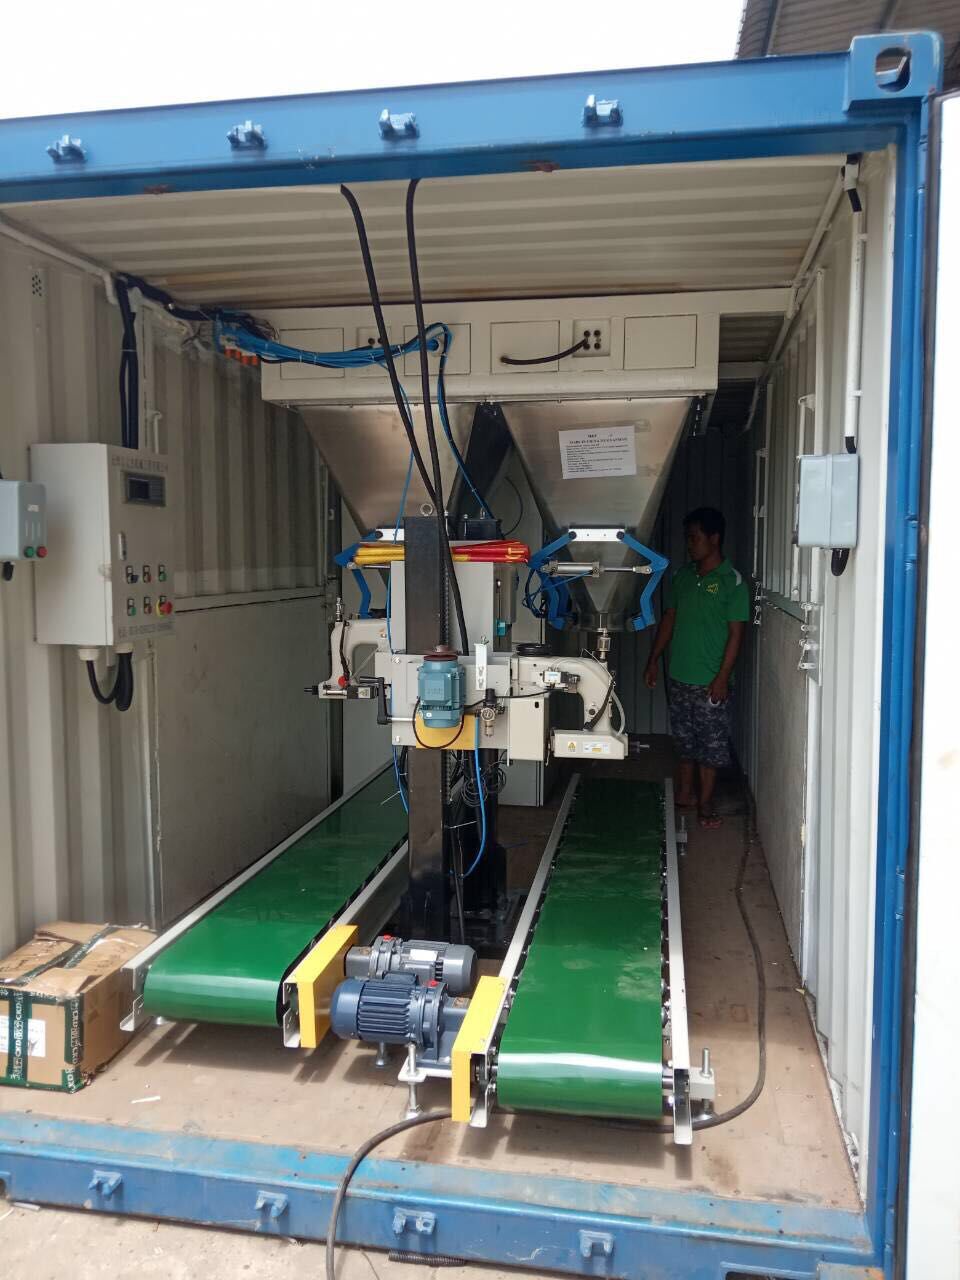 Containerised Bagging System, Mobile Bagging Unit, Mobile Containserized Bagging Unit, Fully Automatic Packing System, Wuxi HY Machinery Co., Ltd